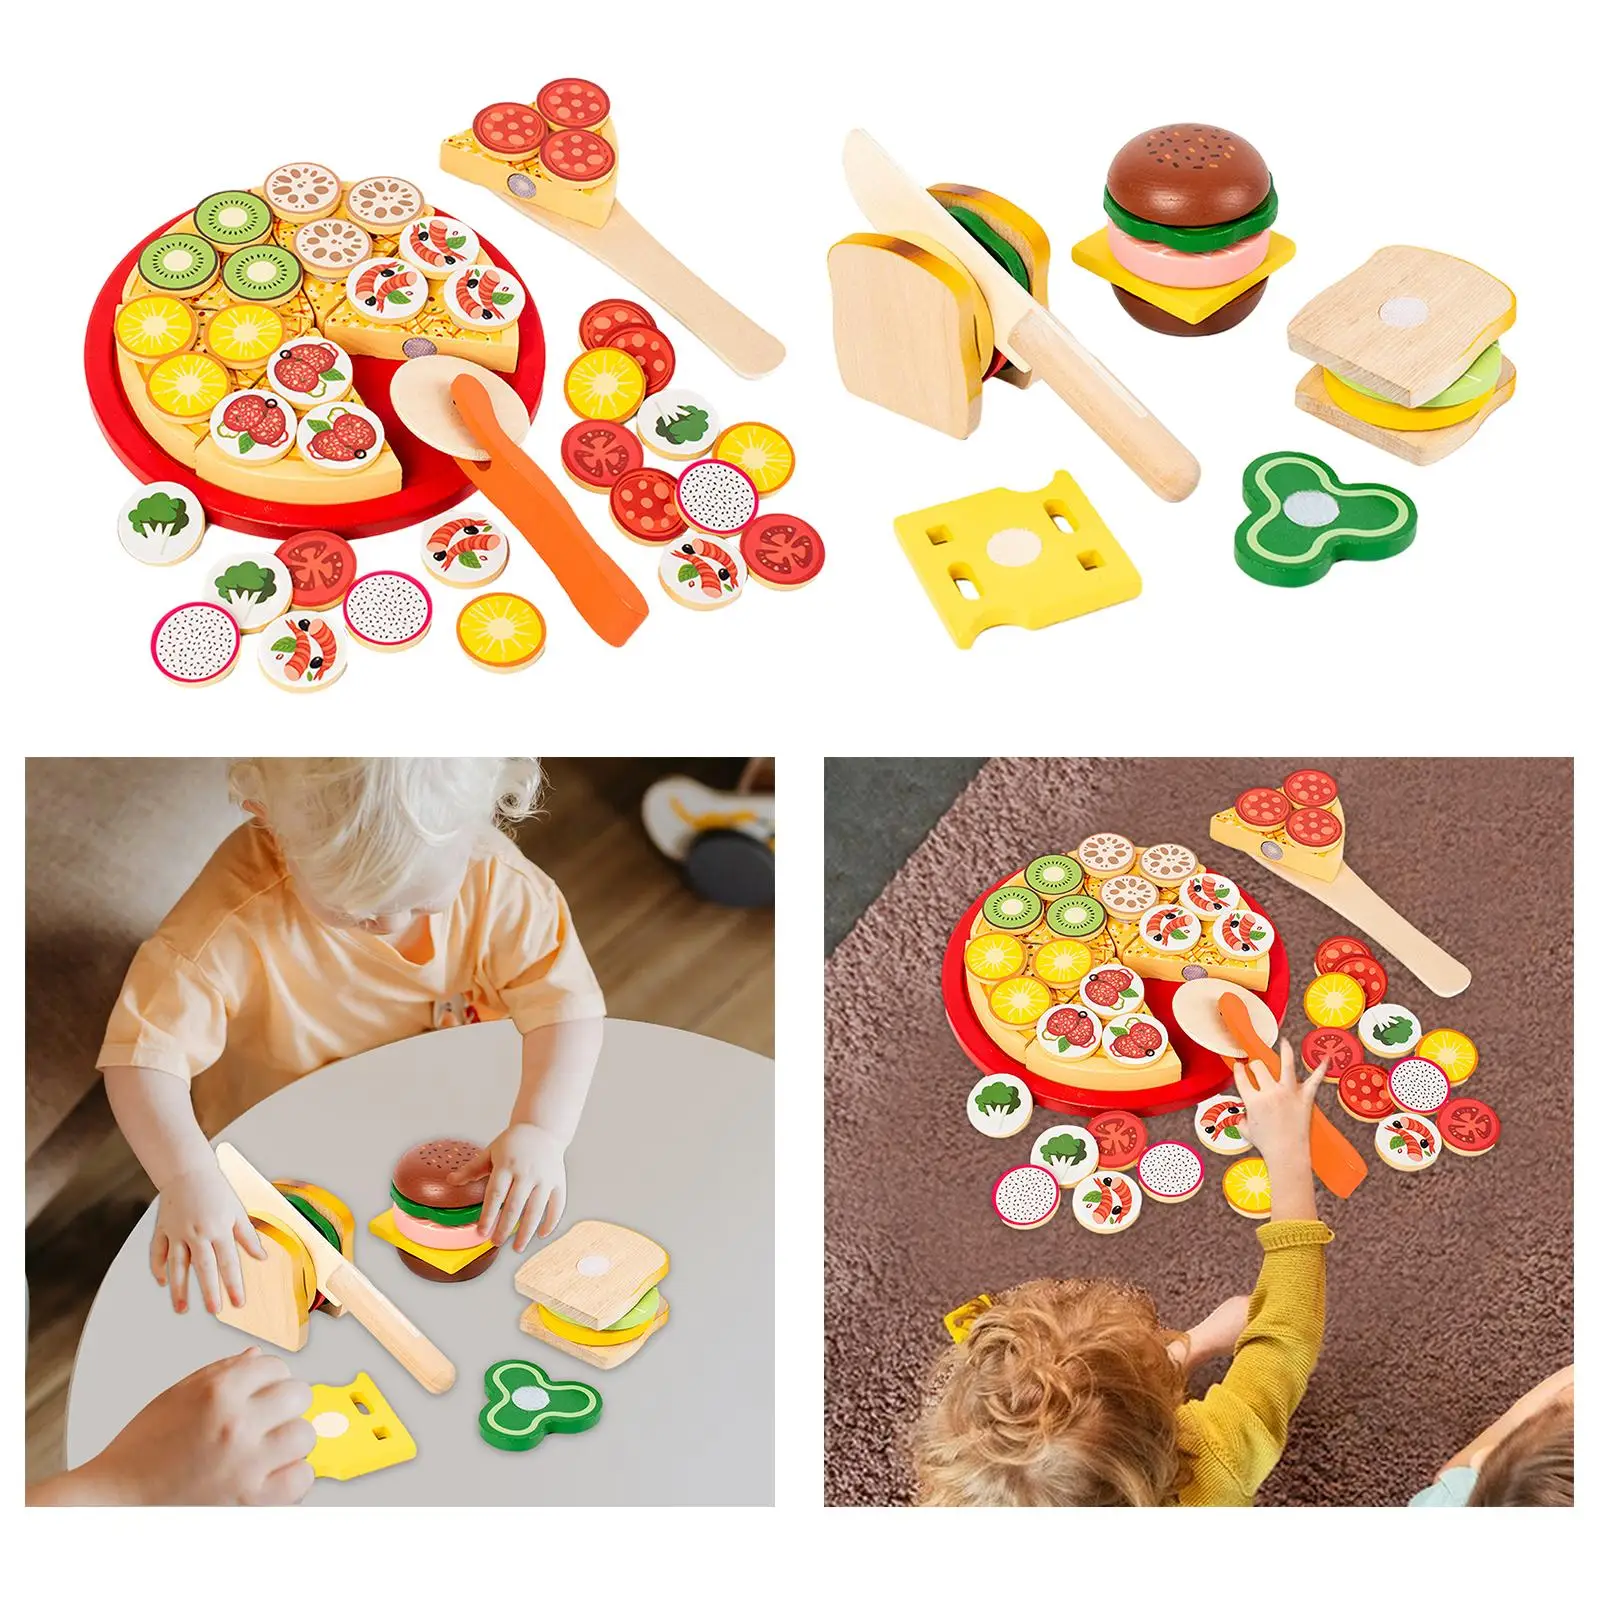 Toddlers Pretend Cooking Toys Preschool Montessori Realistic Kitchen Playset for Birthday Furnishings Crafts Window Display Gift